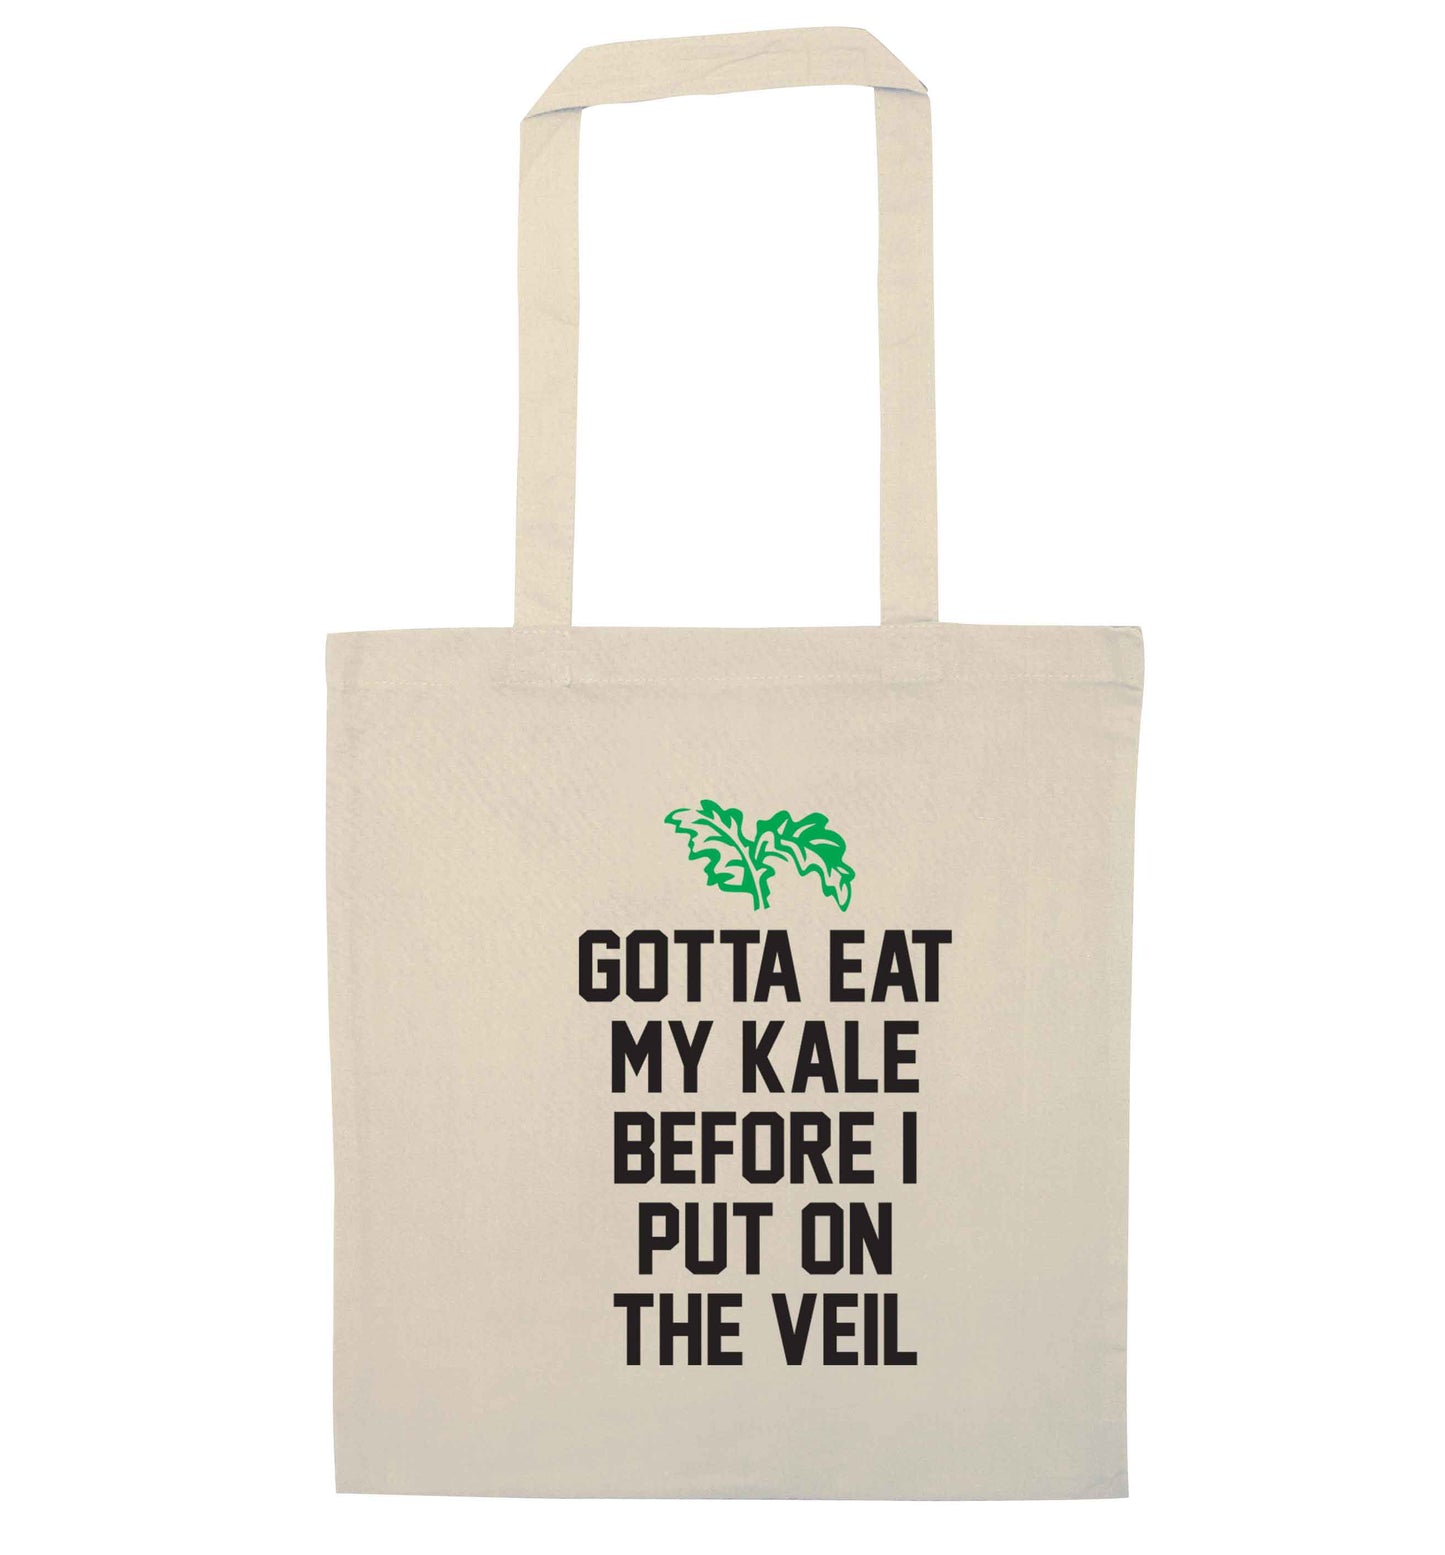 Gotta eat my kale before I put on the veil natural tote bag